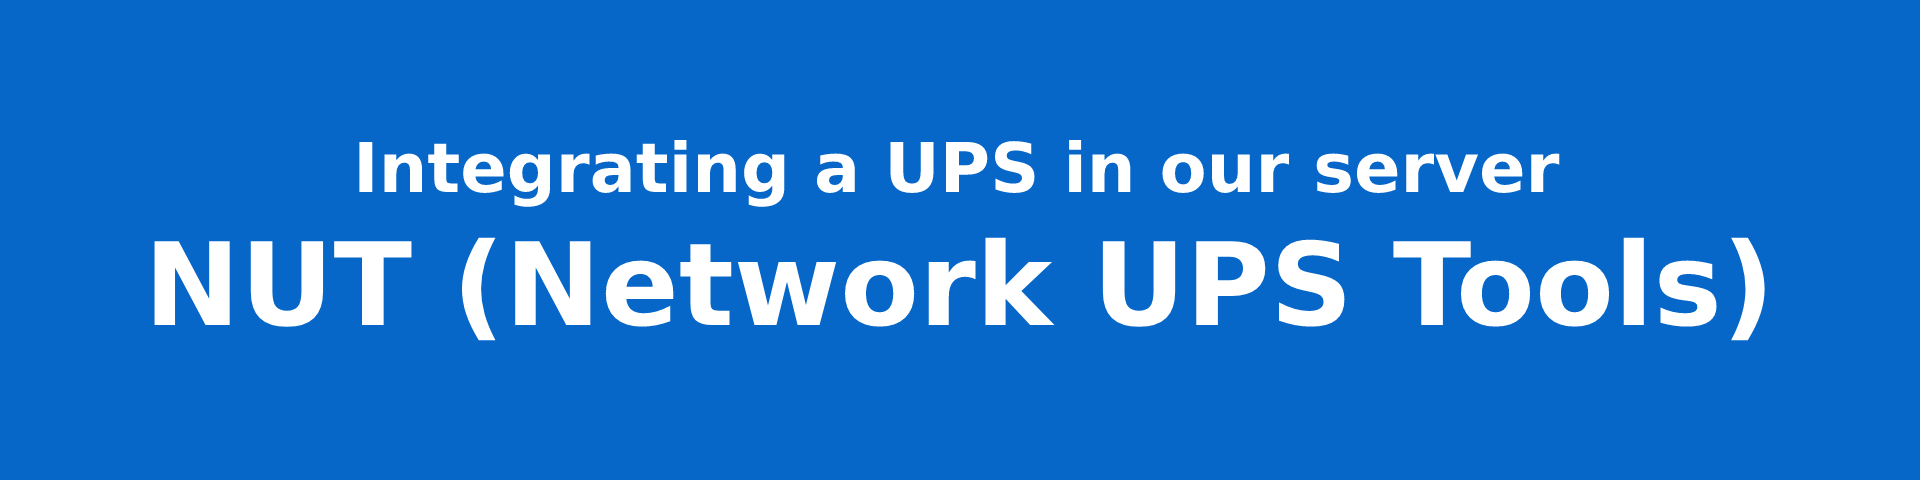 Integrating a UPS in our server